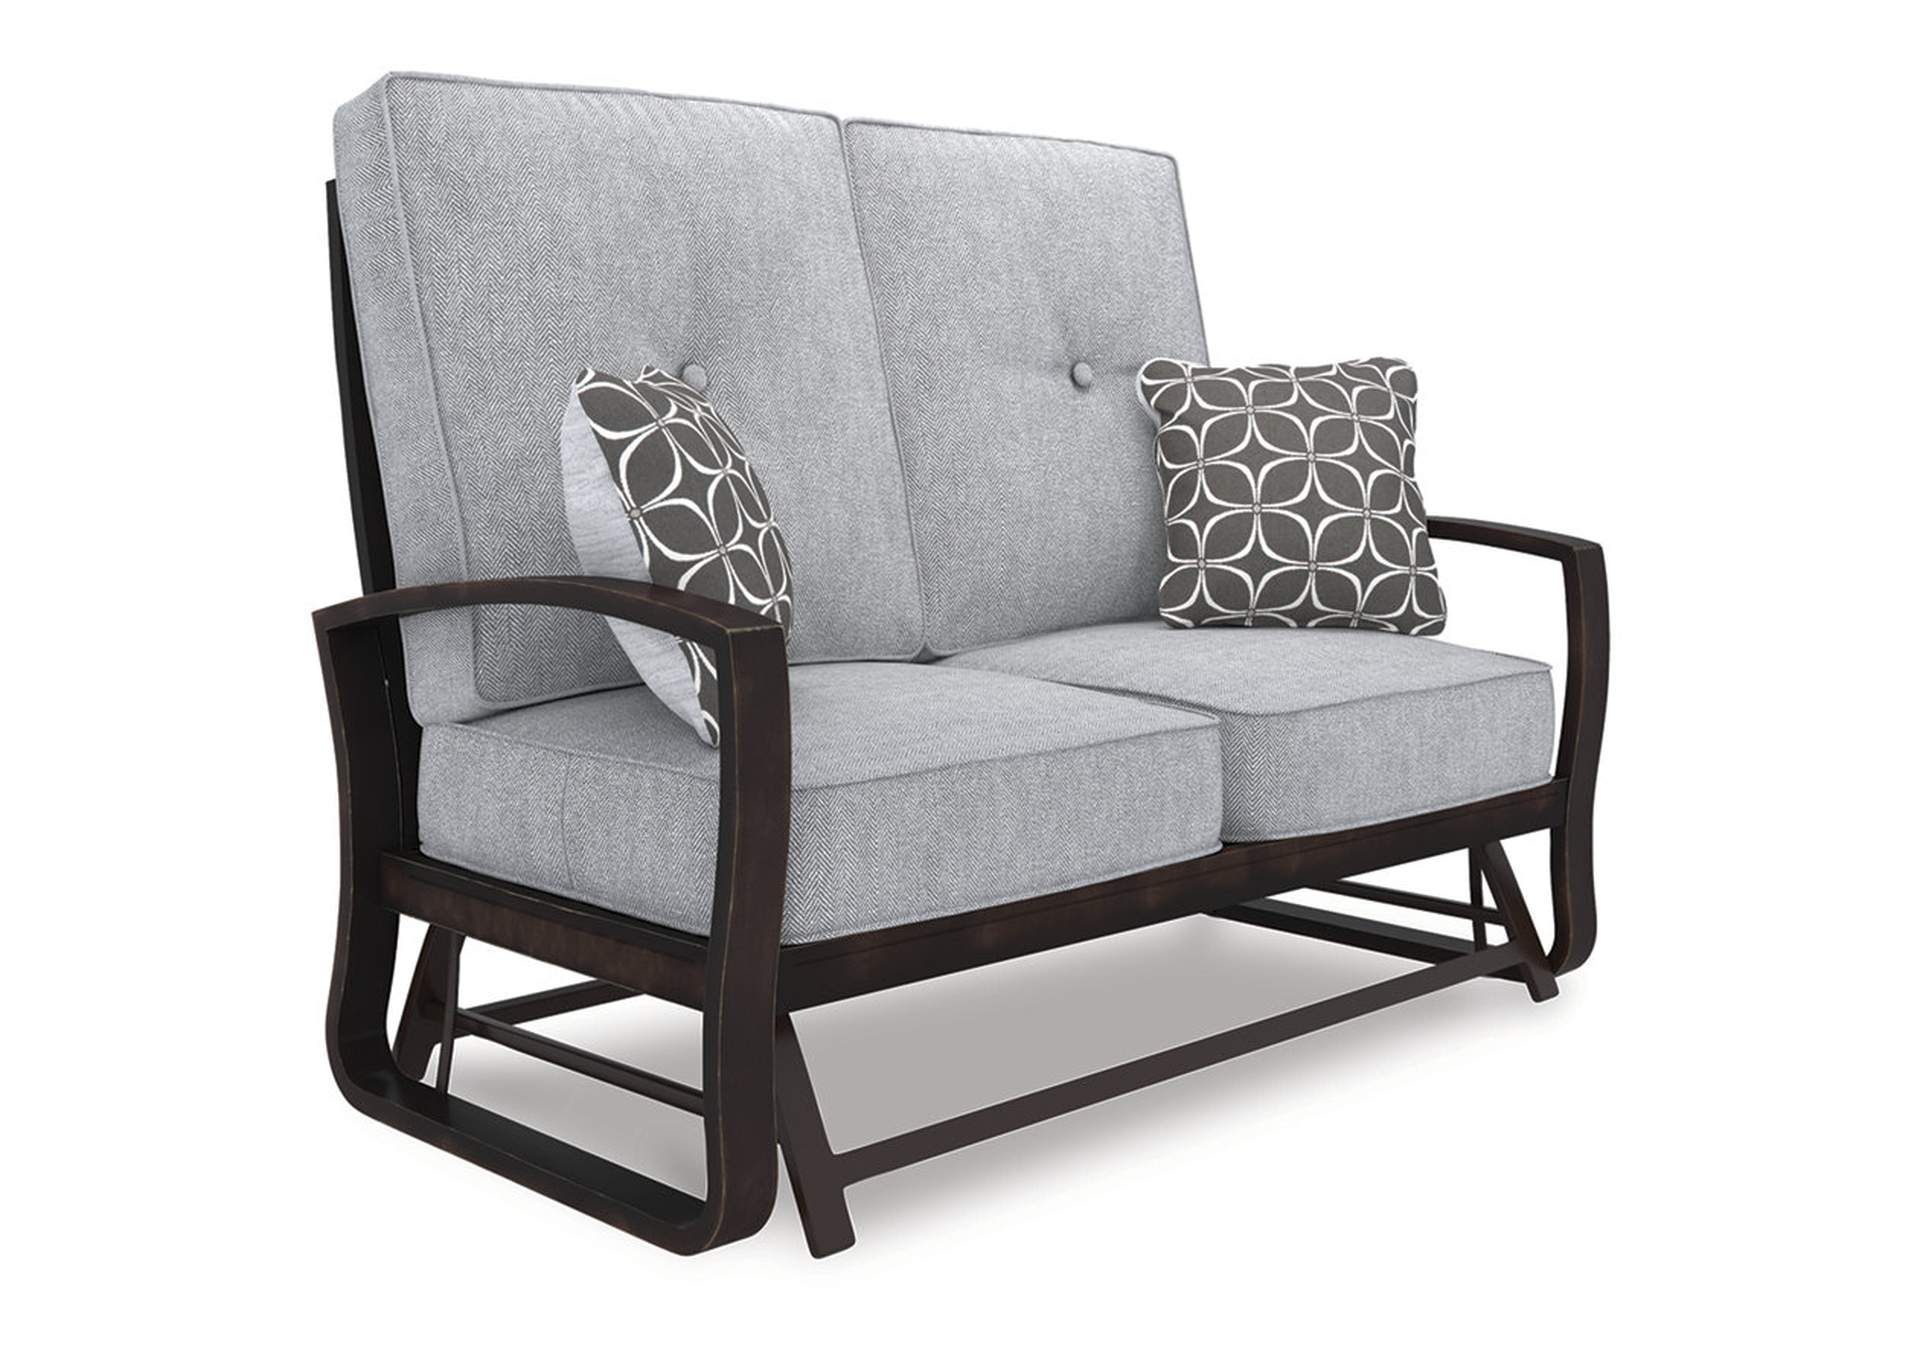 Castle Island Loveseat Glider with Cushion,Outdoor By Ashley